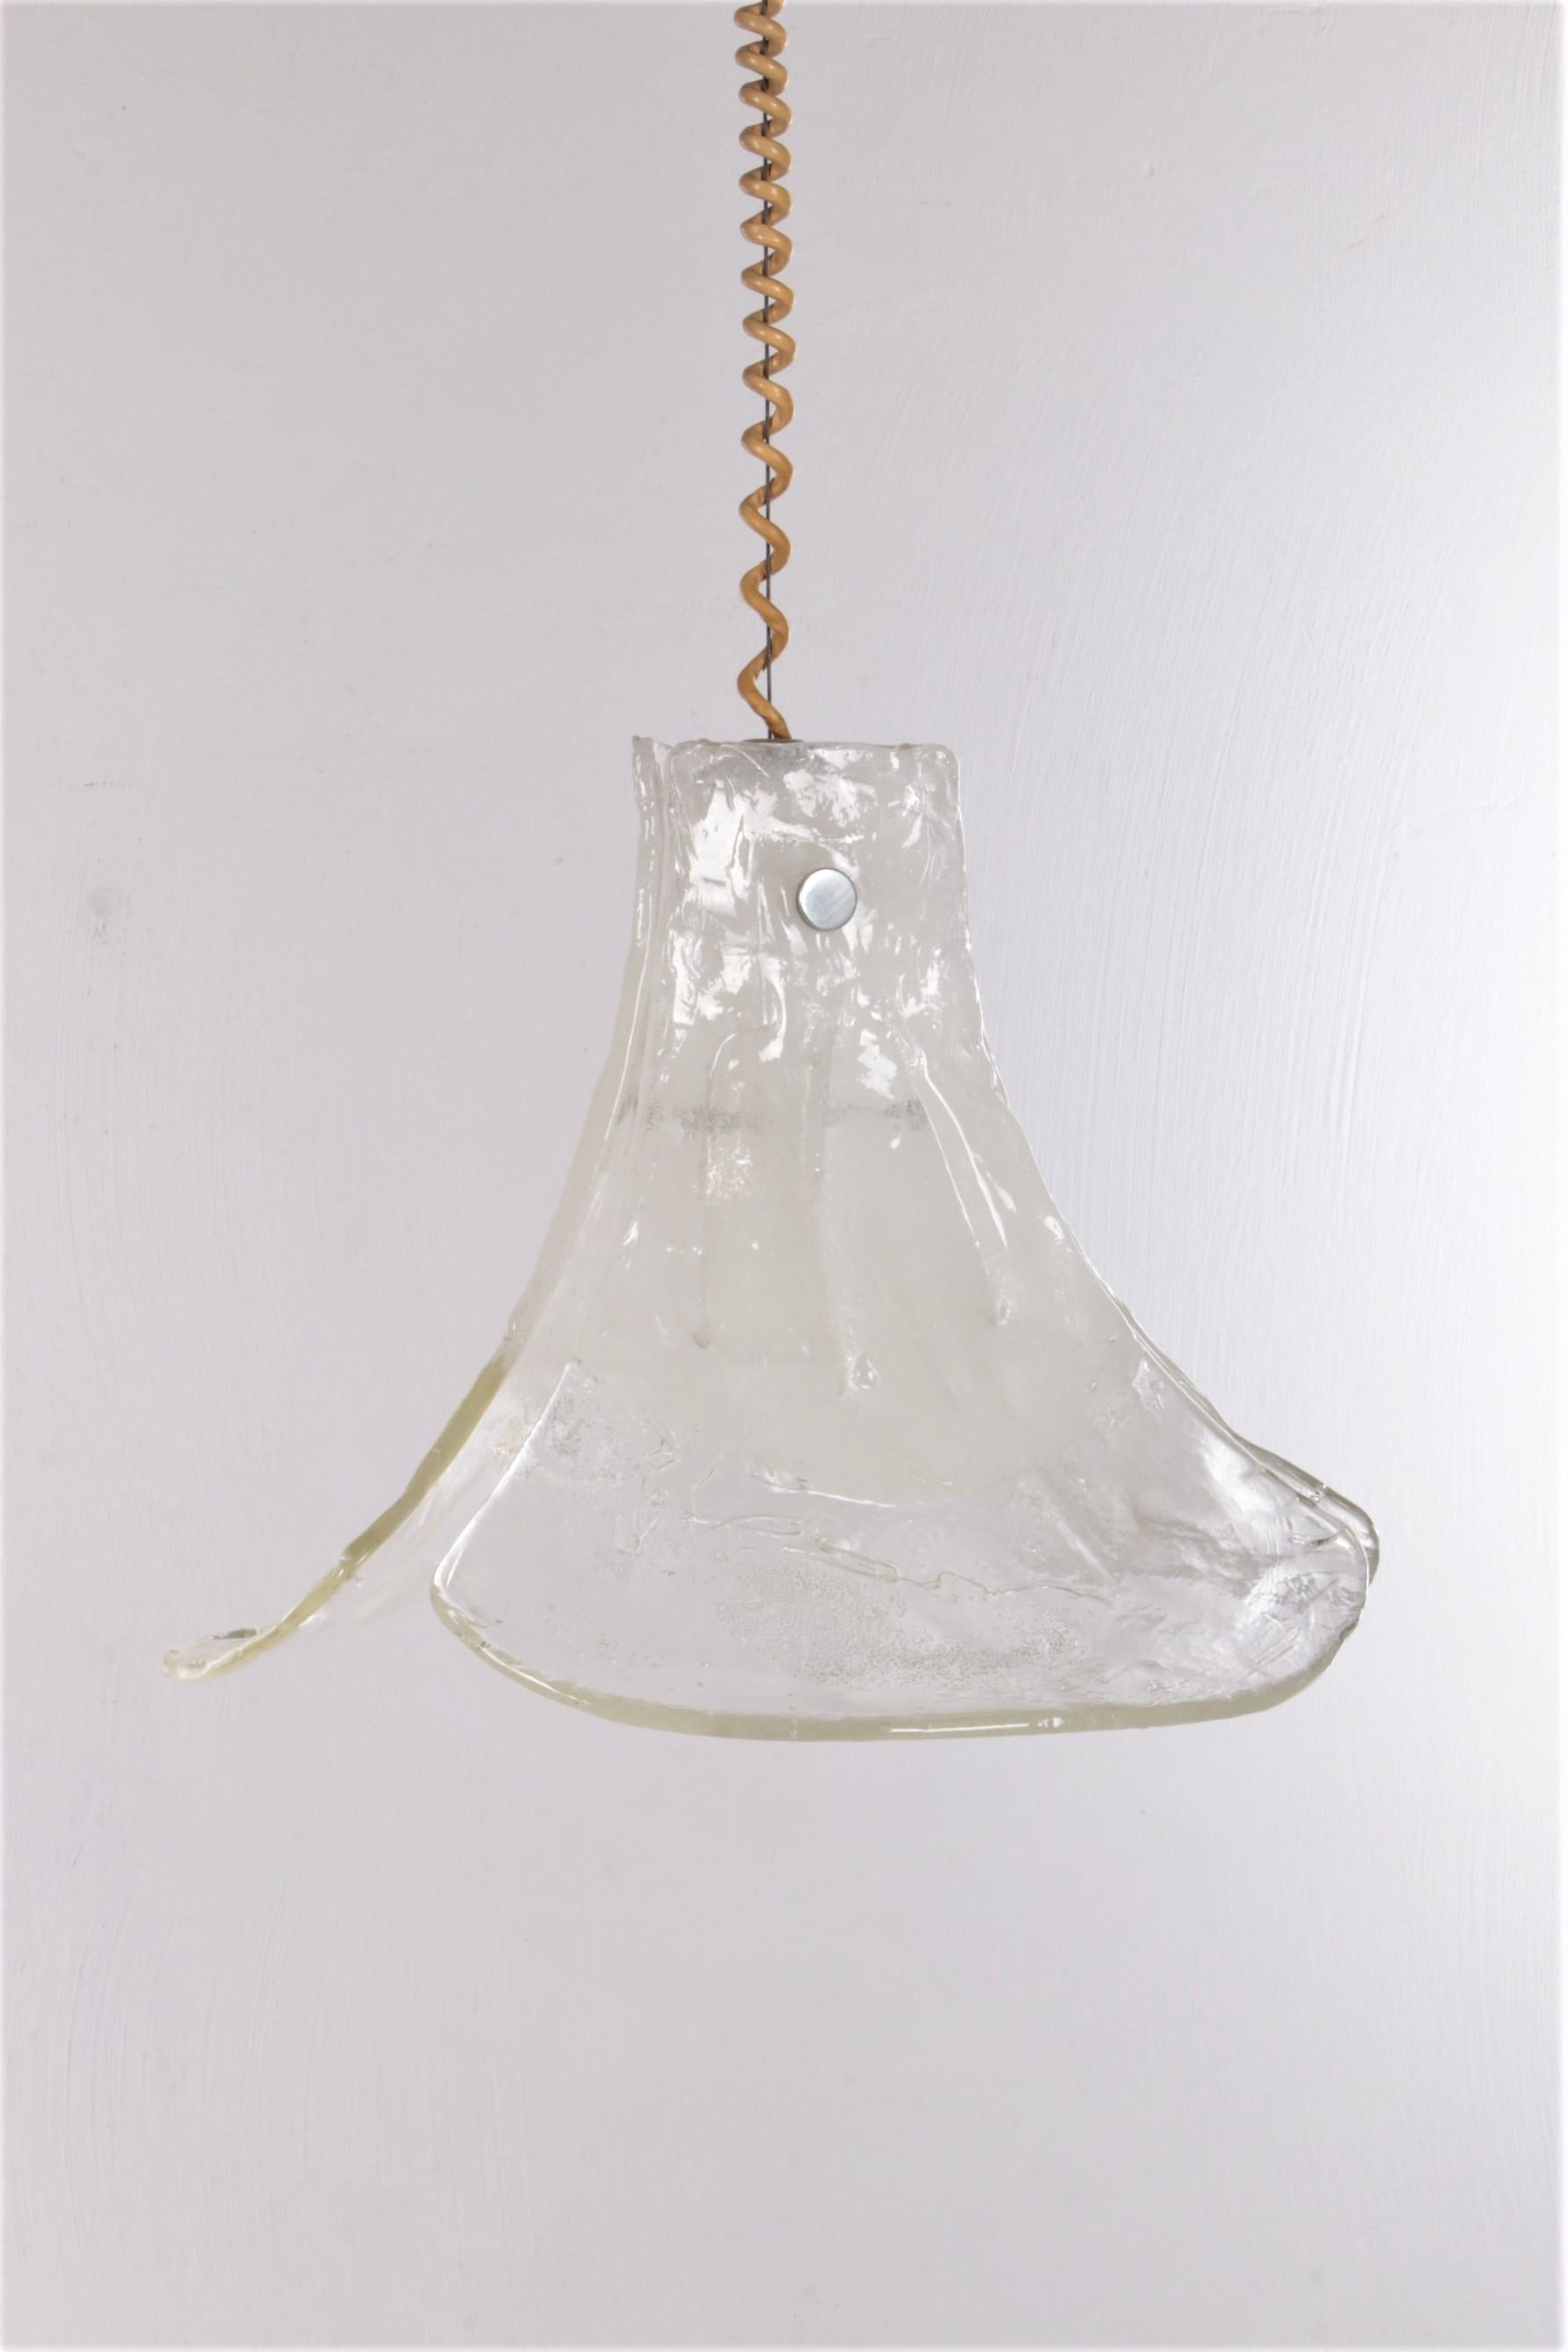 Vintage mid-century glass hanging lamp by J. T. Kalmar, 1960


This is a beautiful pendant lamp made by J.T. Kalmar in 1960. The lamp has 3 handmade white transparent glass sheets that you can screw on and off separately.

The lamp gives off a nice